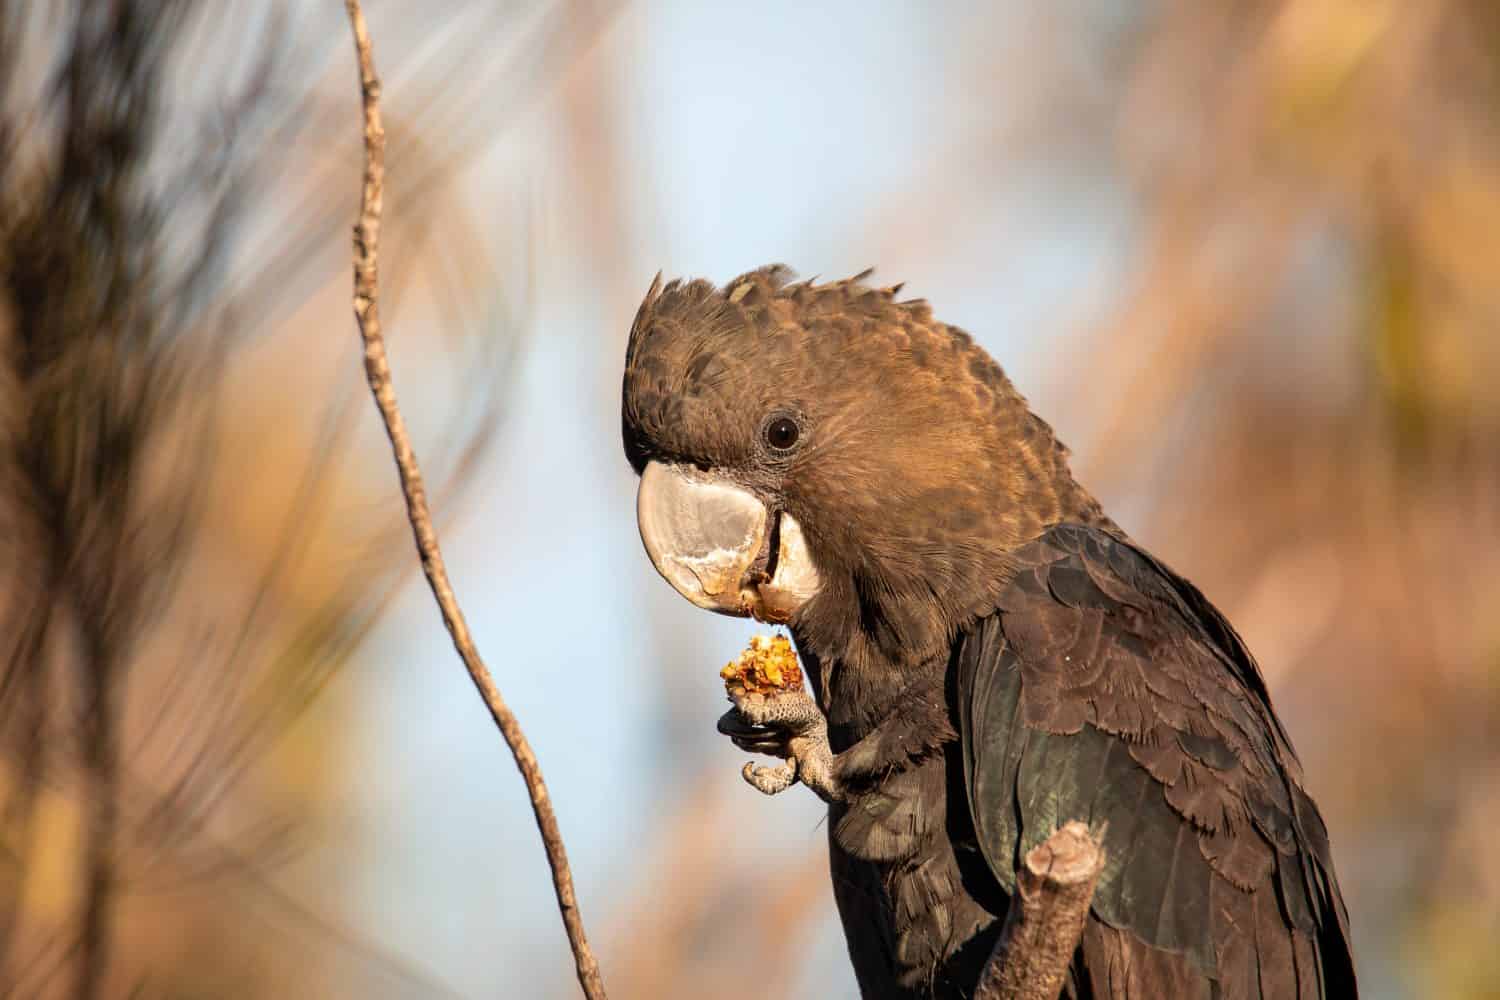 Glossy black cockatoo sitting in a tree.